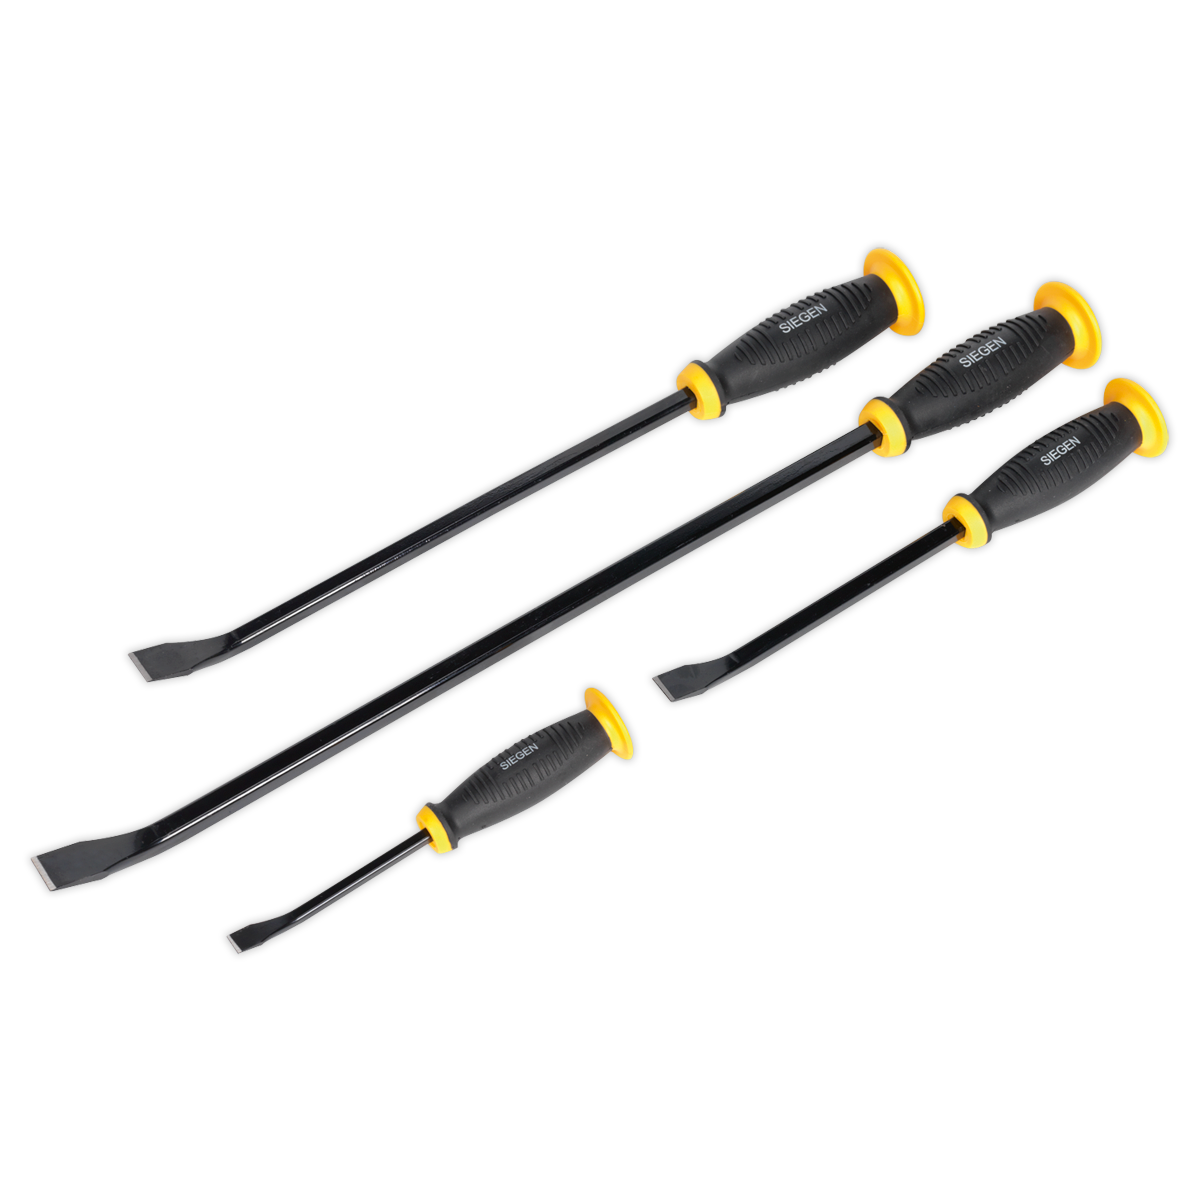 Pry Bar Set with Hammer Cap 4pc - S0557 - Farming Parts